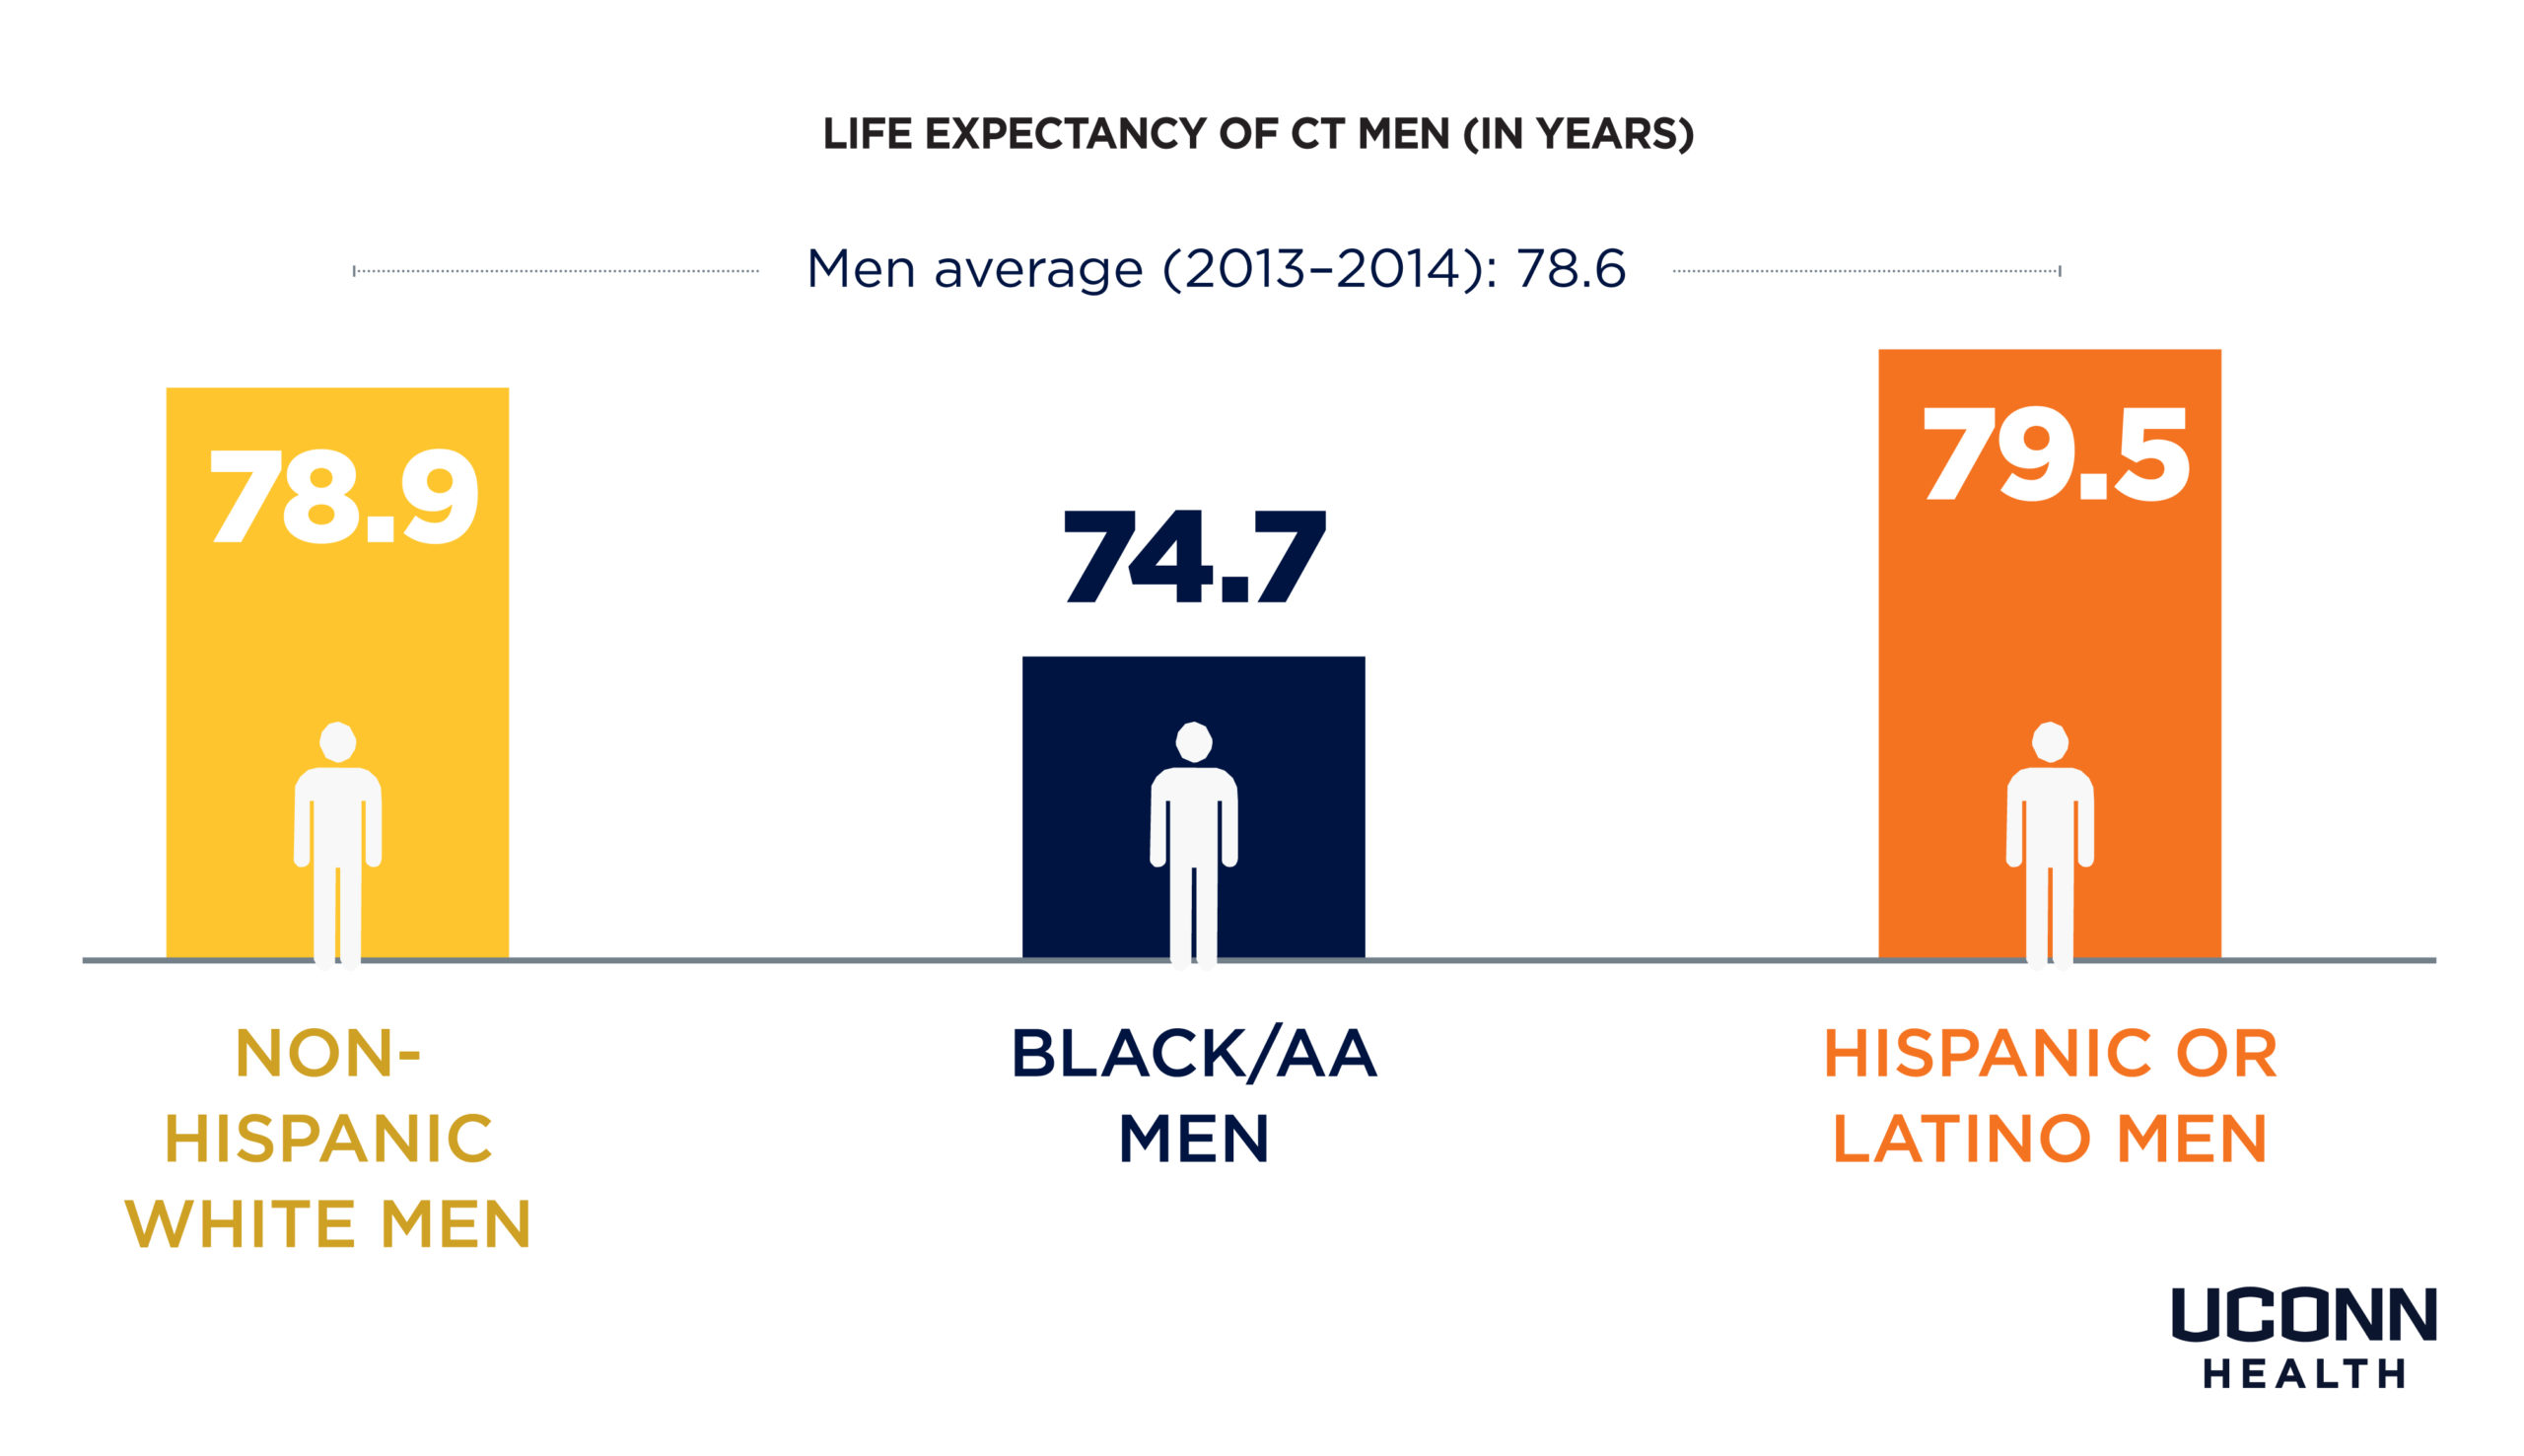 CDC: Life Expectancy of Black Men Has Dropped by 3 Years